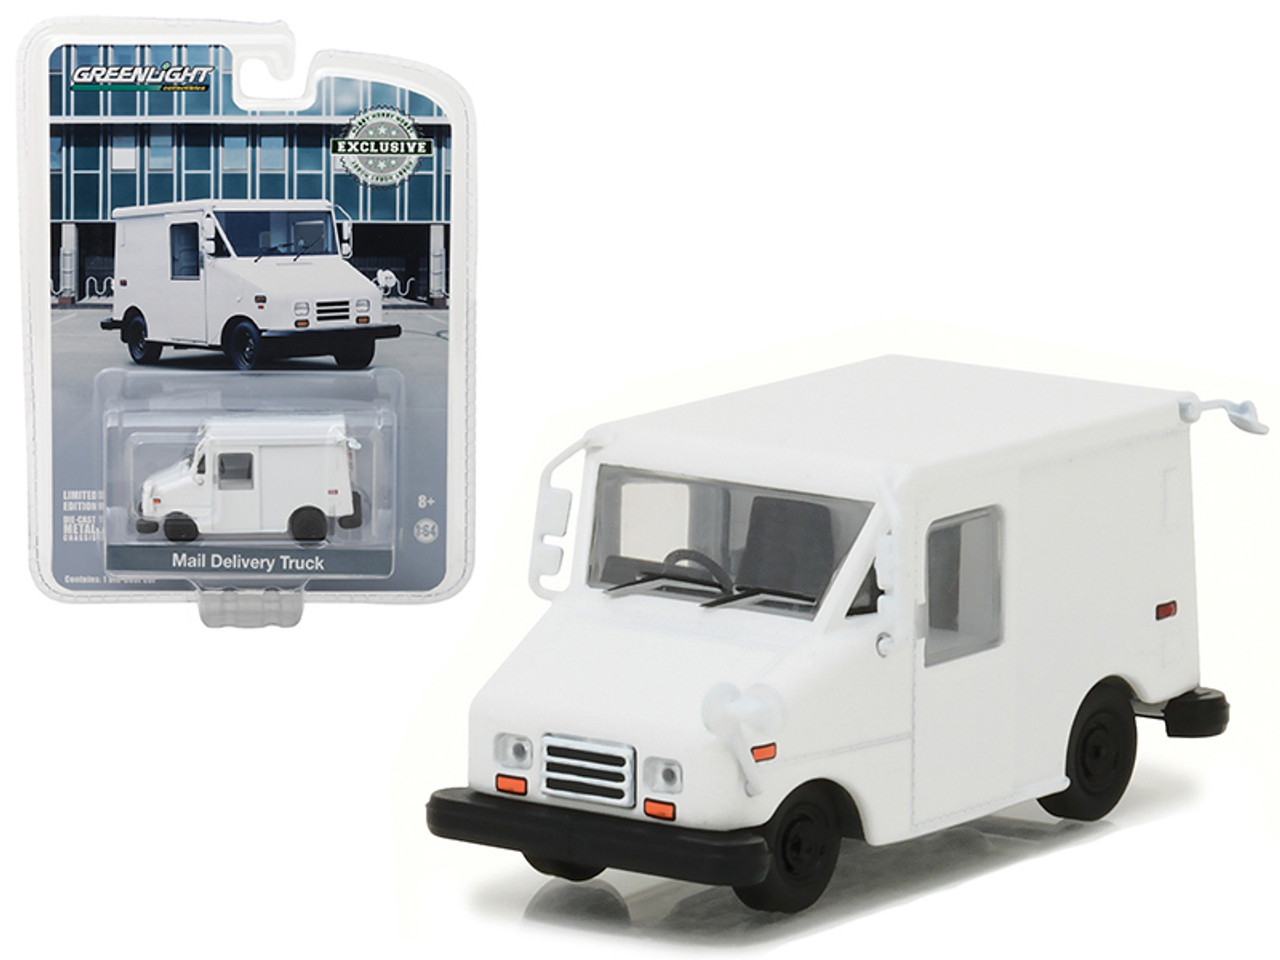 Long Live Postal Mail Delivery Vehicle (LLV) Hobby Exclusive 1/64 Diecast Model Car by Greenlight